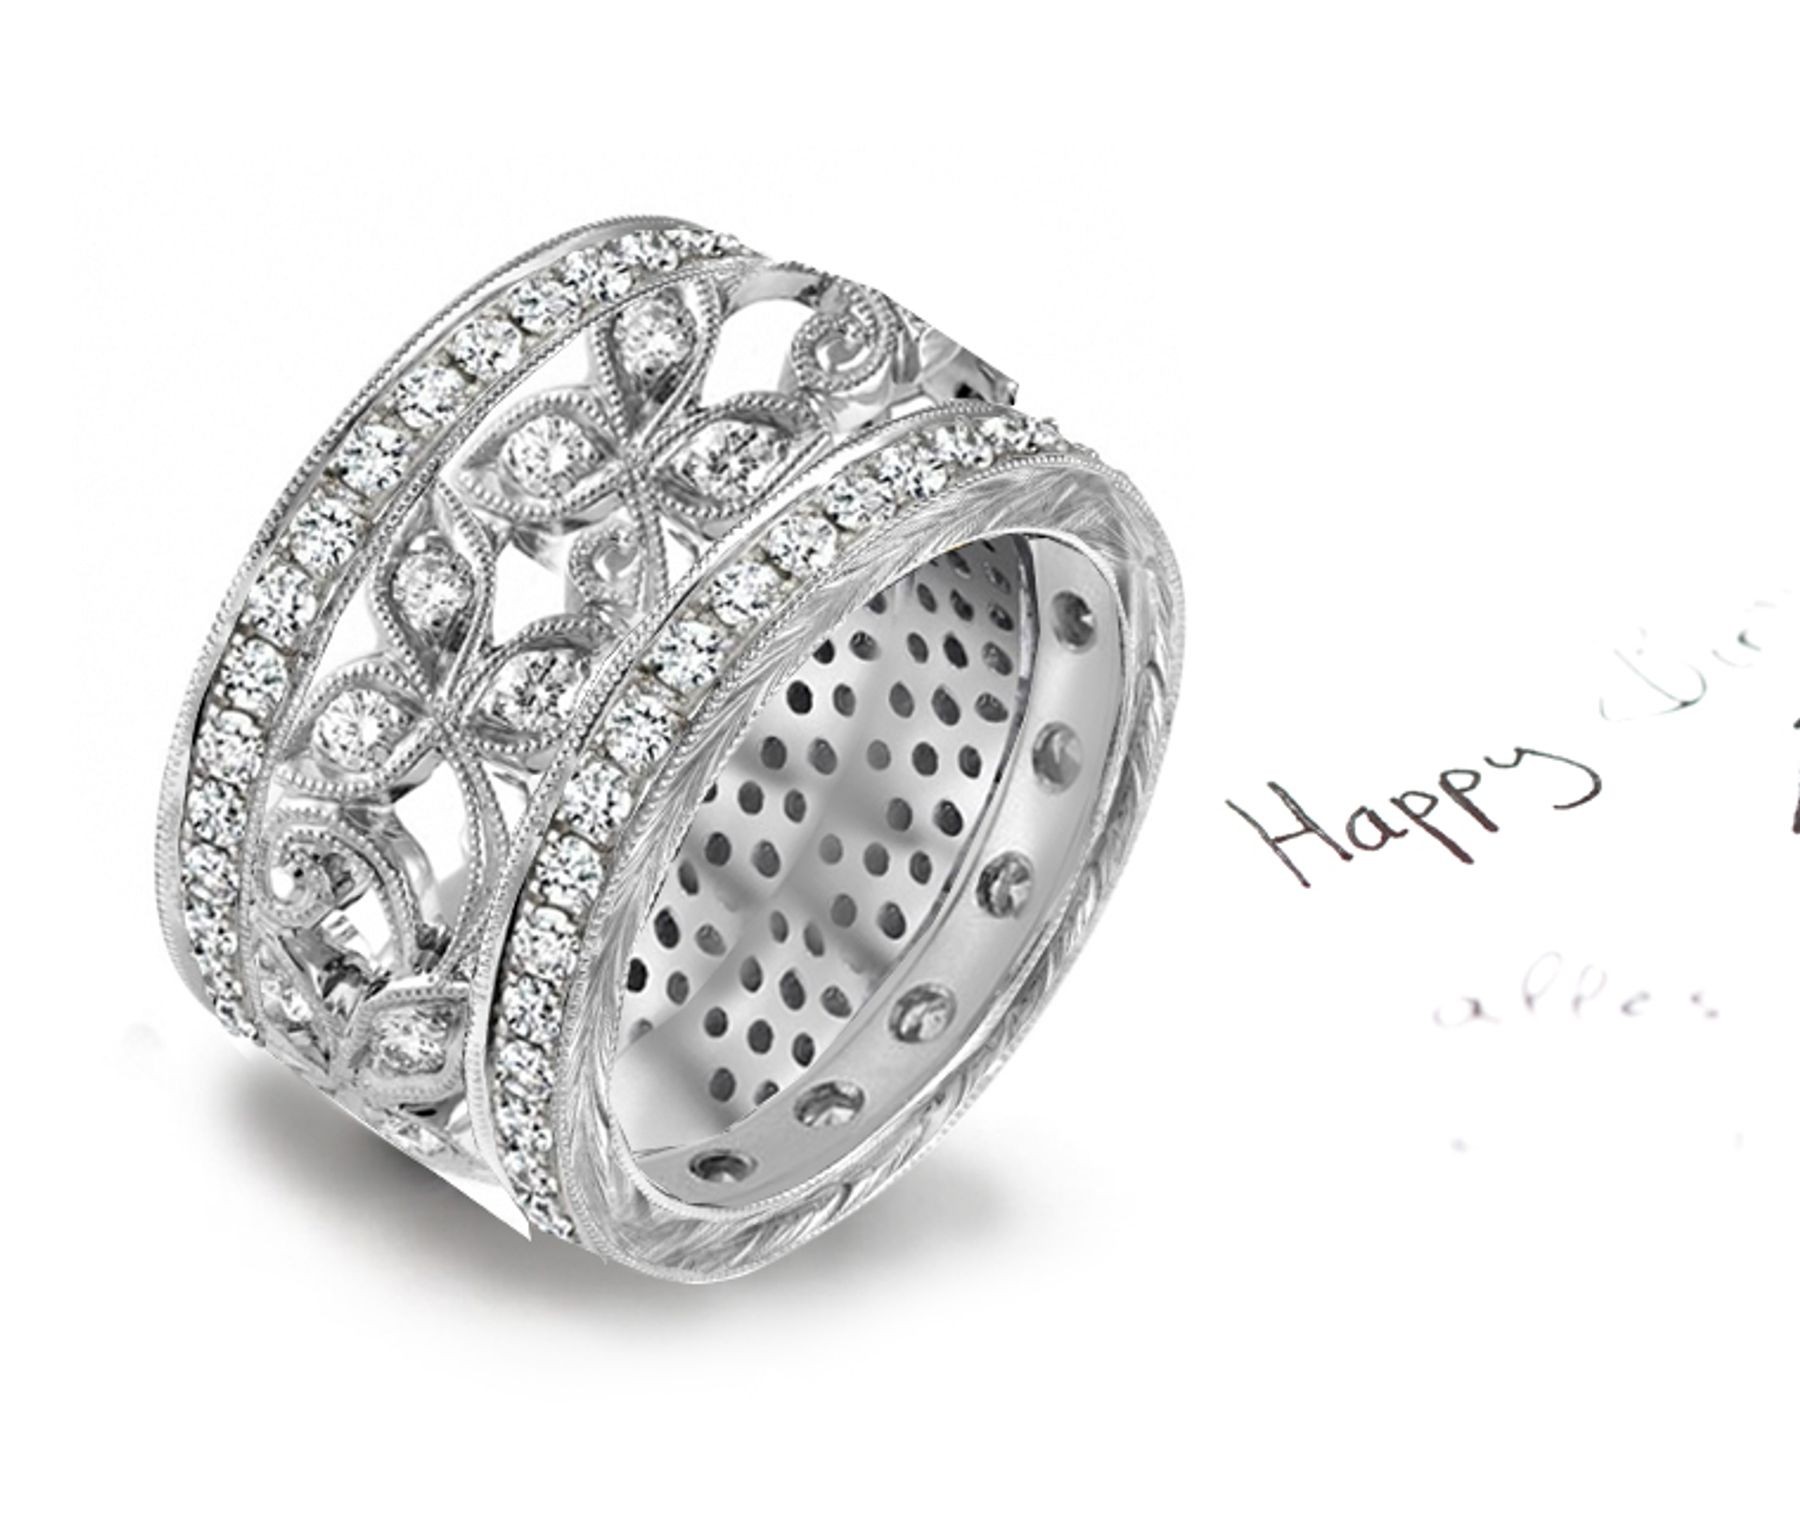 Platinum Diamond Band with Open Floral Scroll Work in Center & Bead Set Diamond Borders